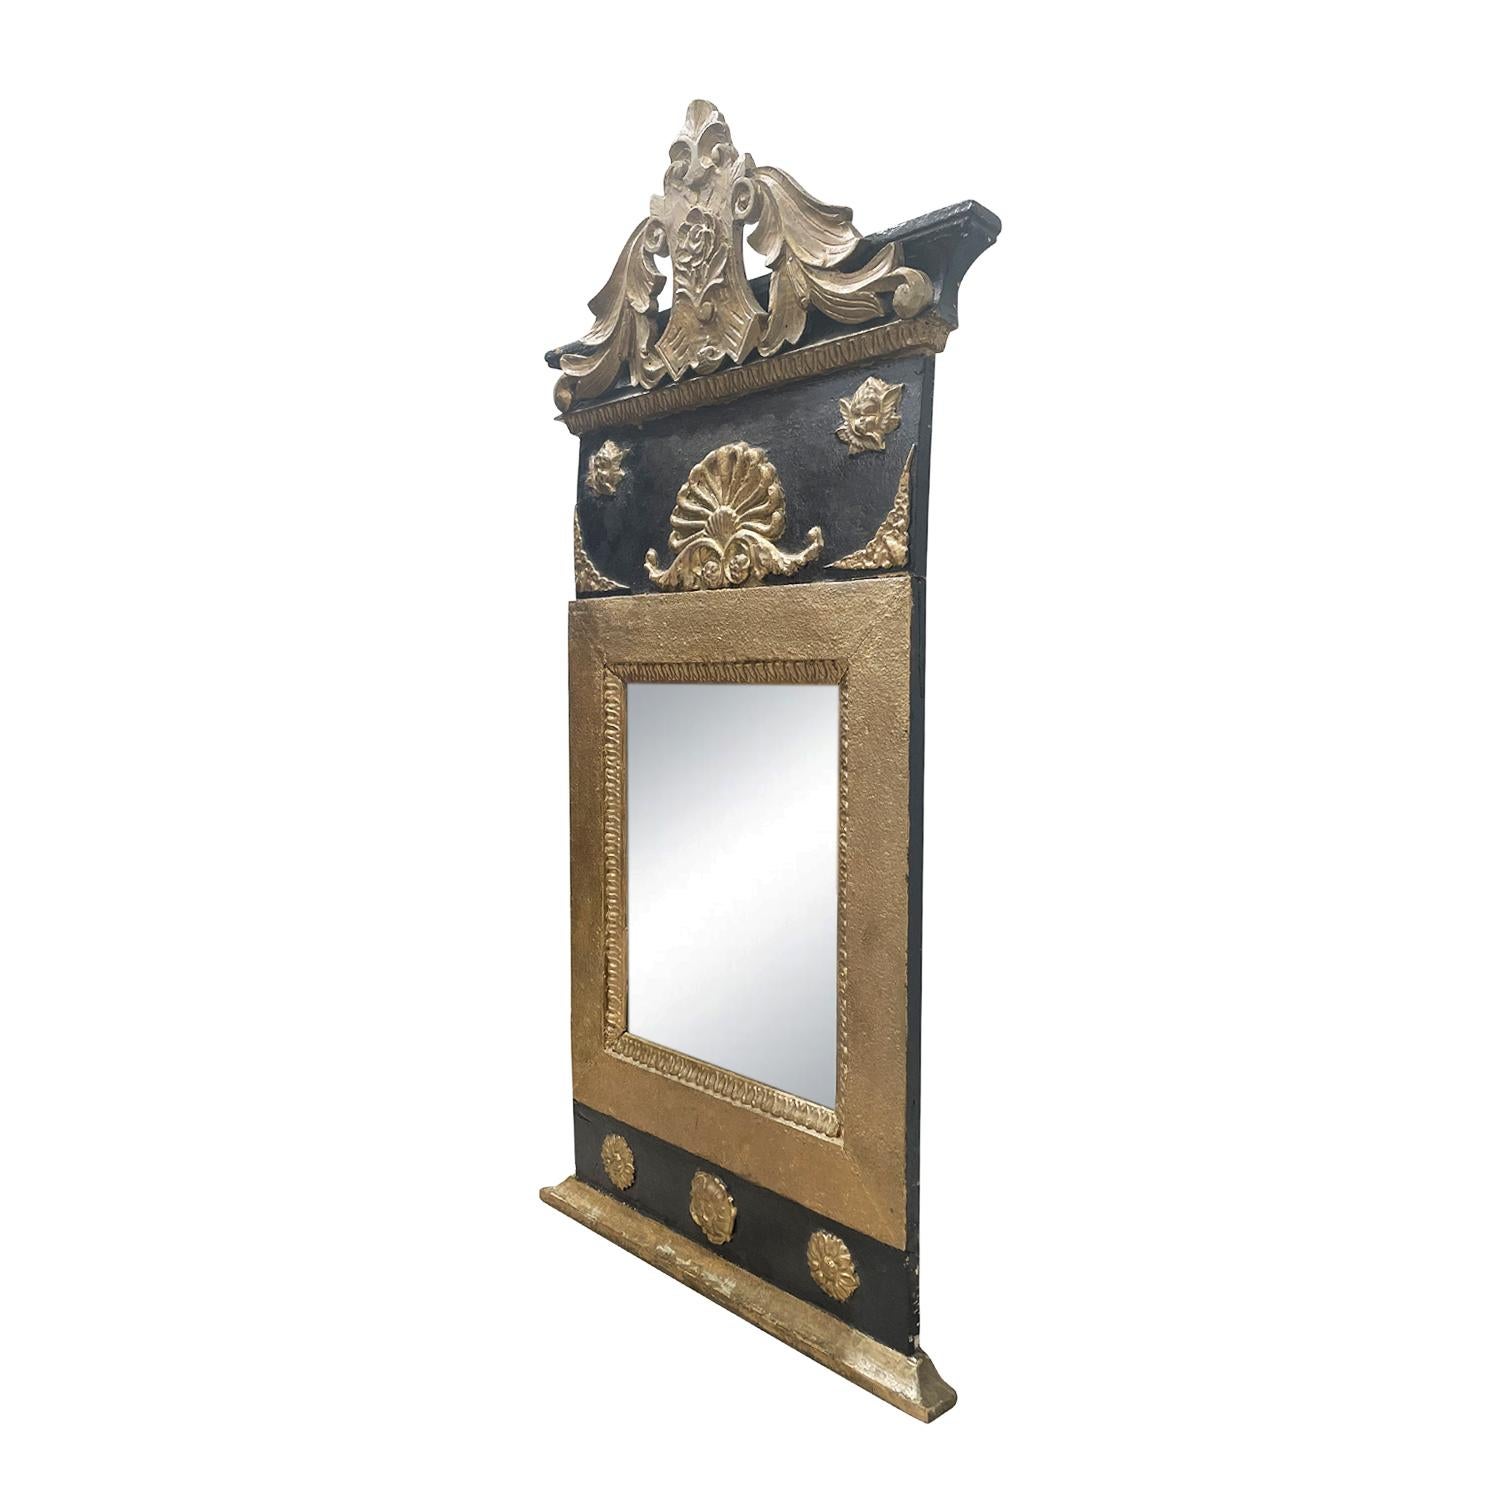 A black-gold, antique French wall mirror made of hand crafted gilded Pinewood with its original mirrored glass, in good condition. The particularized carved Parisian mirror is enhanced by detailed flower wood carvings and fittings. The décor piece